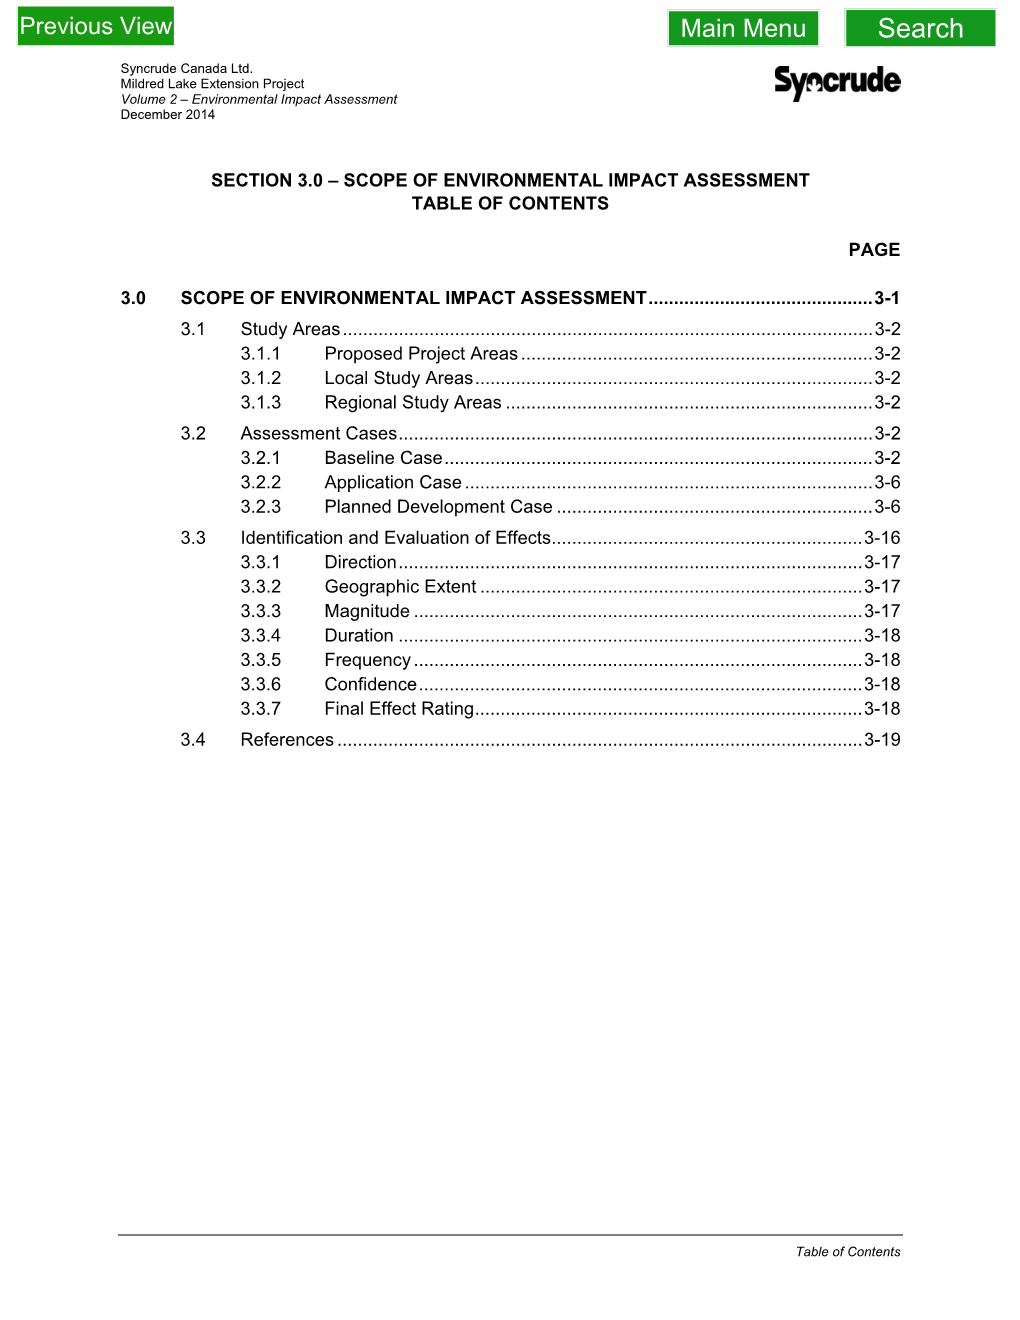 Scope of Environmental Impact Assessment Table of Contents